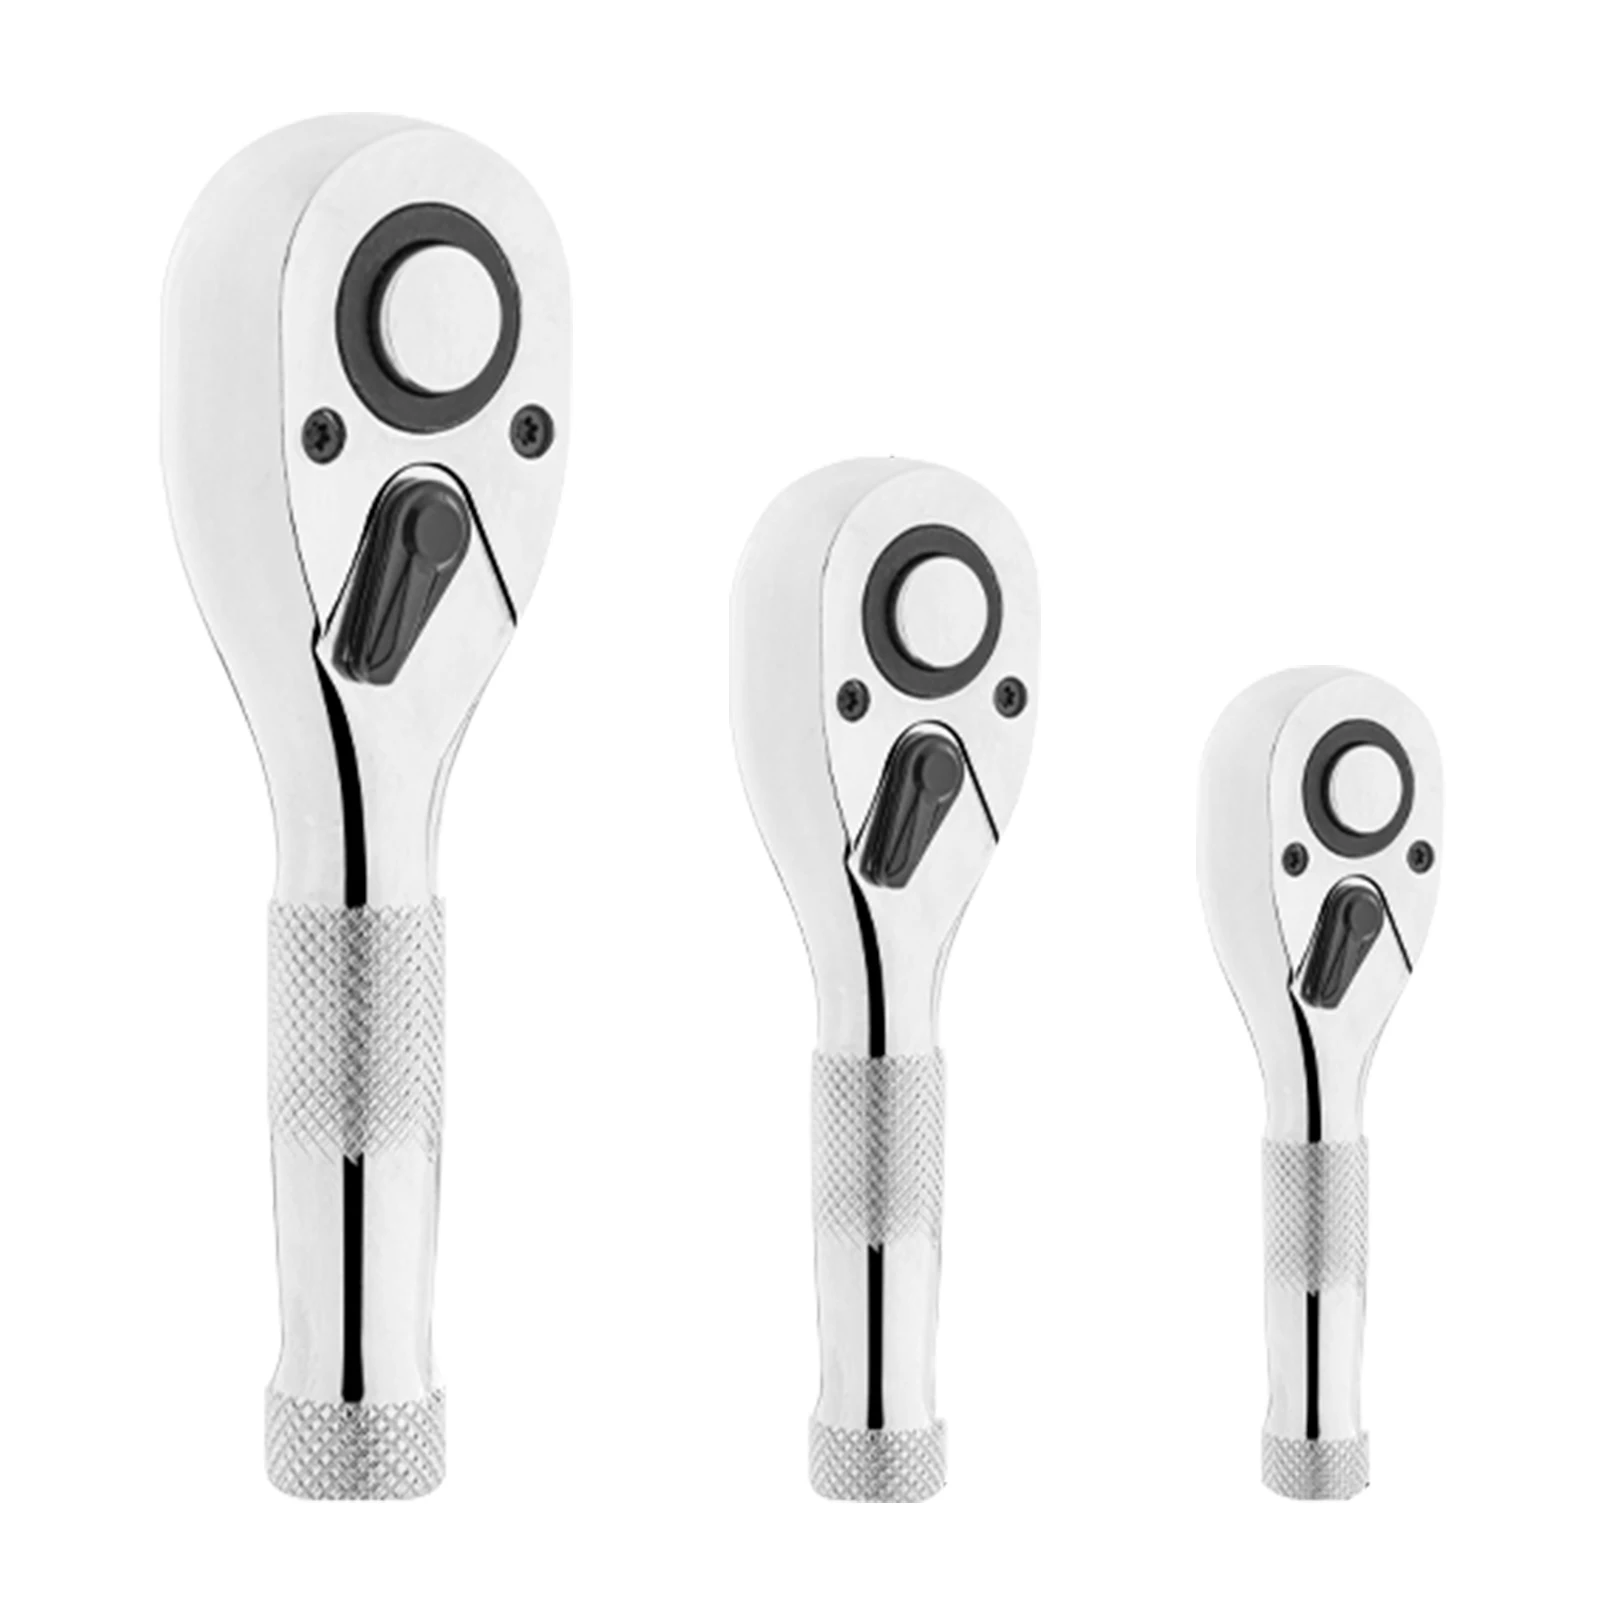 

3pcs 72 Tooth Ratchet Wrench Portable Engine 1/4inch 3/8inch 1/2inch Drive Reversible Professional Chrome Vanadium Steel Tool